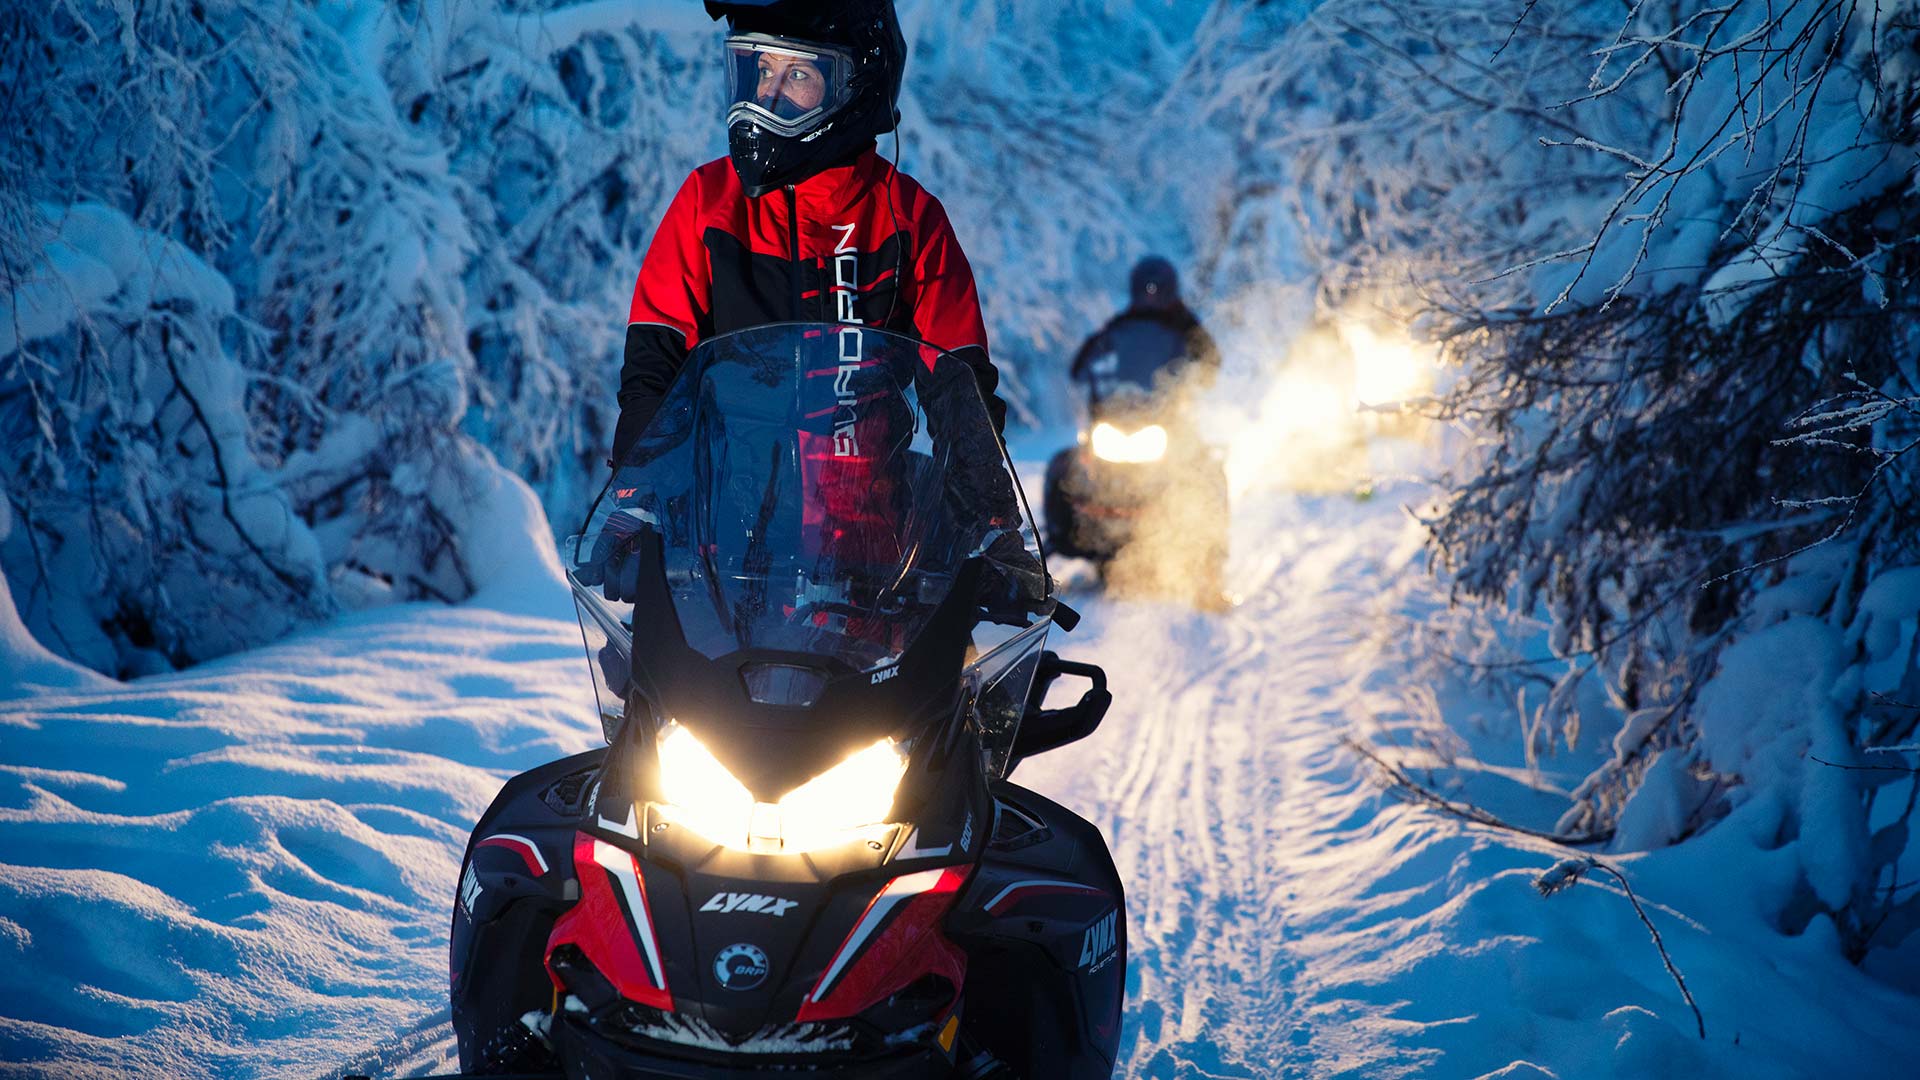 Lynx Adventure snowmobile riding in snowy forest